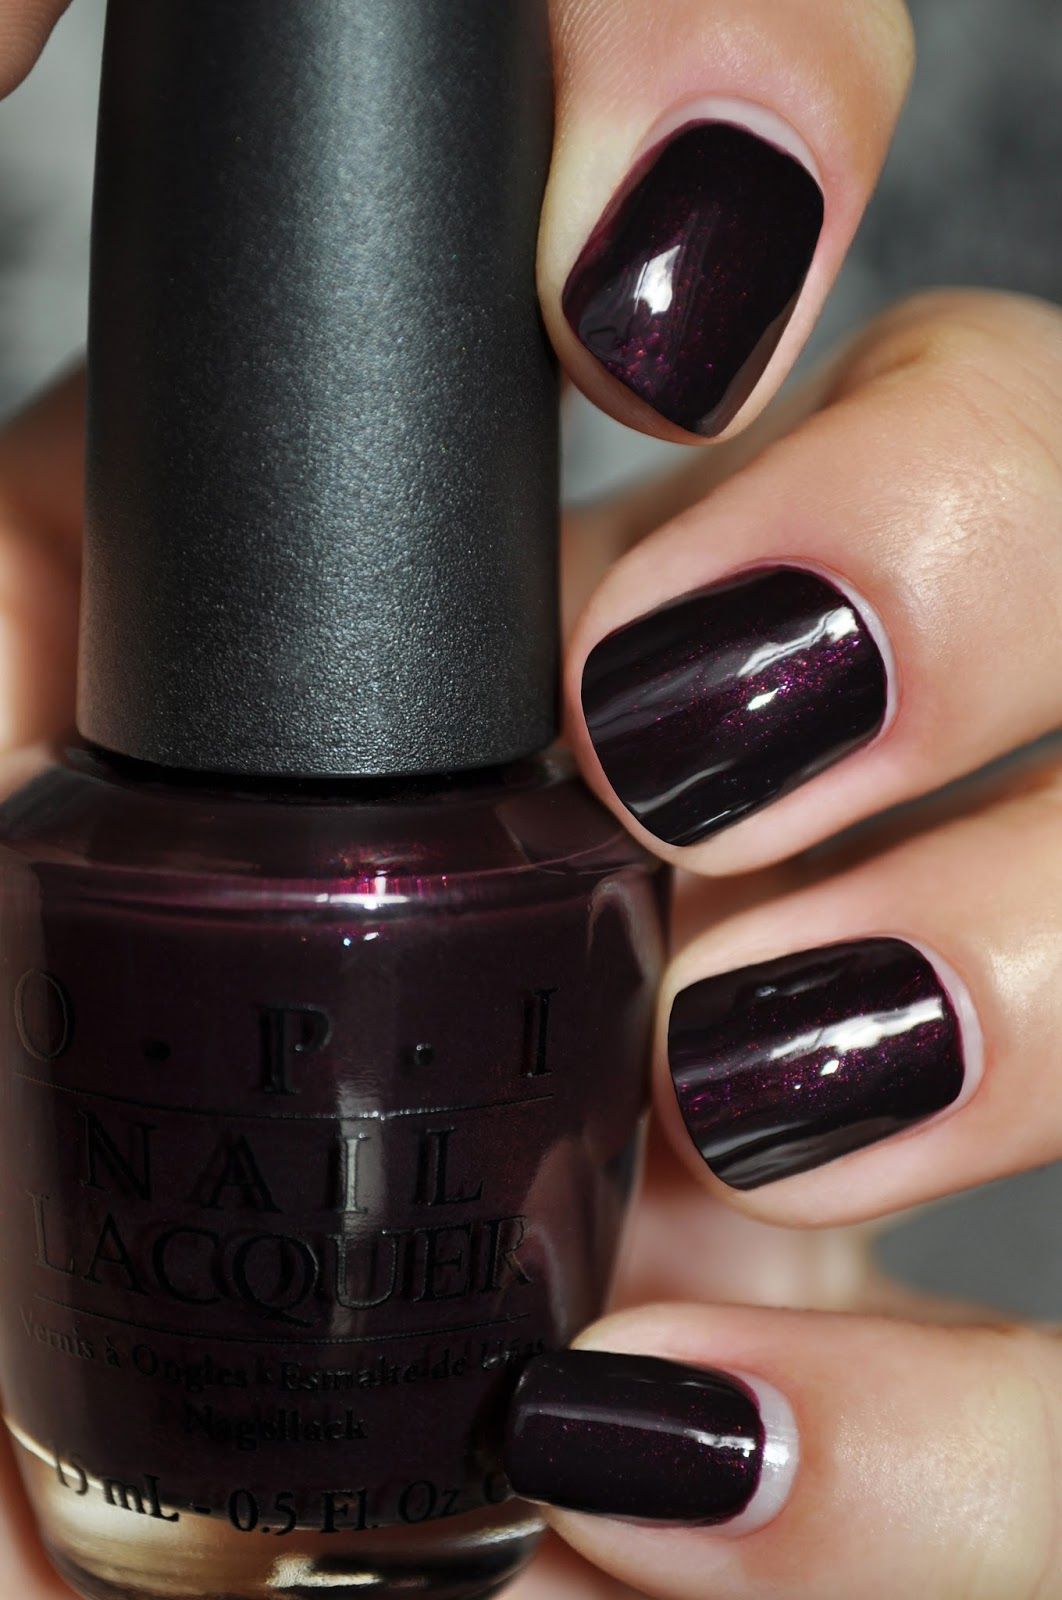 I have this color and absolutely love it.  OPI Black Cherry Chutney.  My new winter